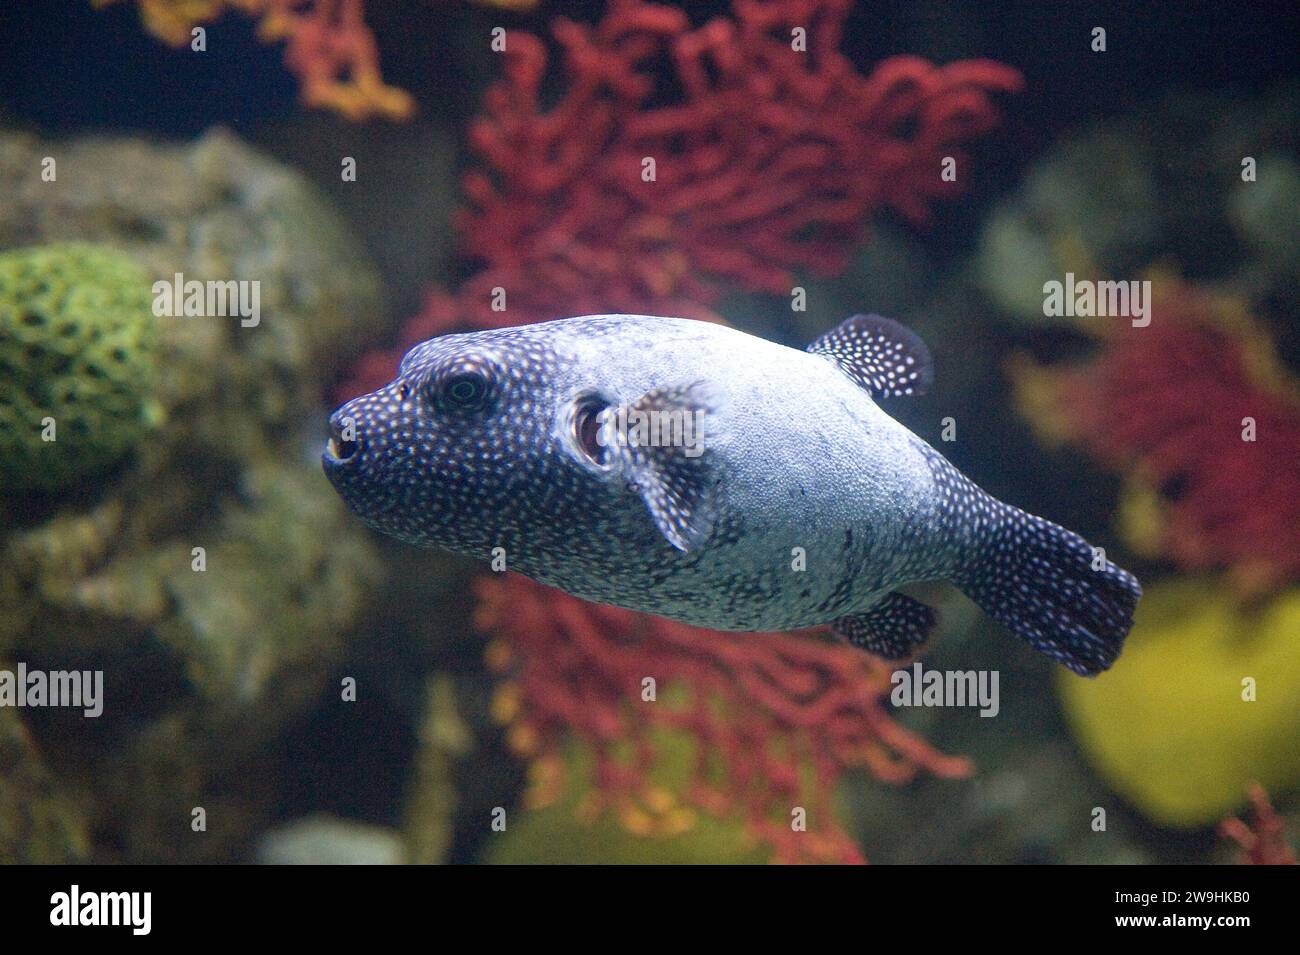 Golden puffer (Arothron meleagris) dark form. This marine fish is native to tropical Indo-Pacific Ocean. Stock Photo